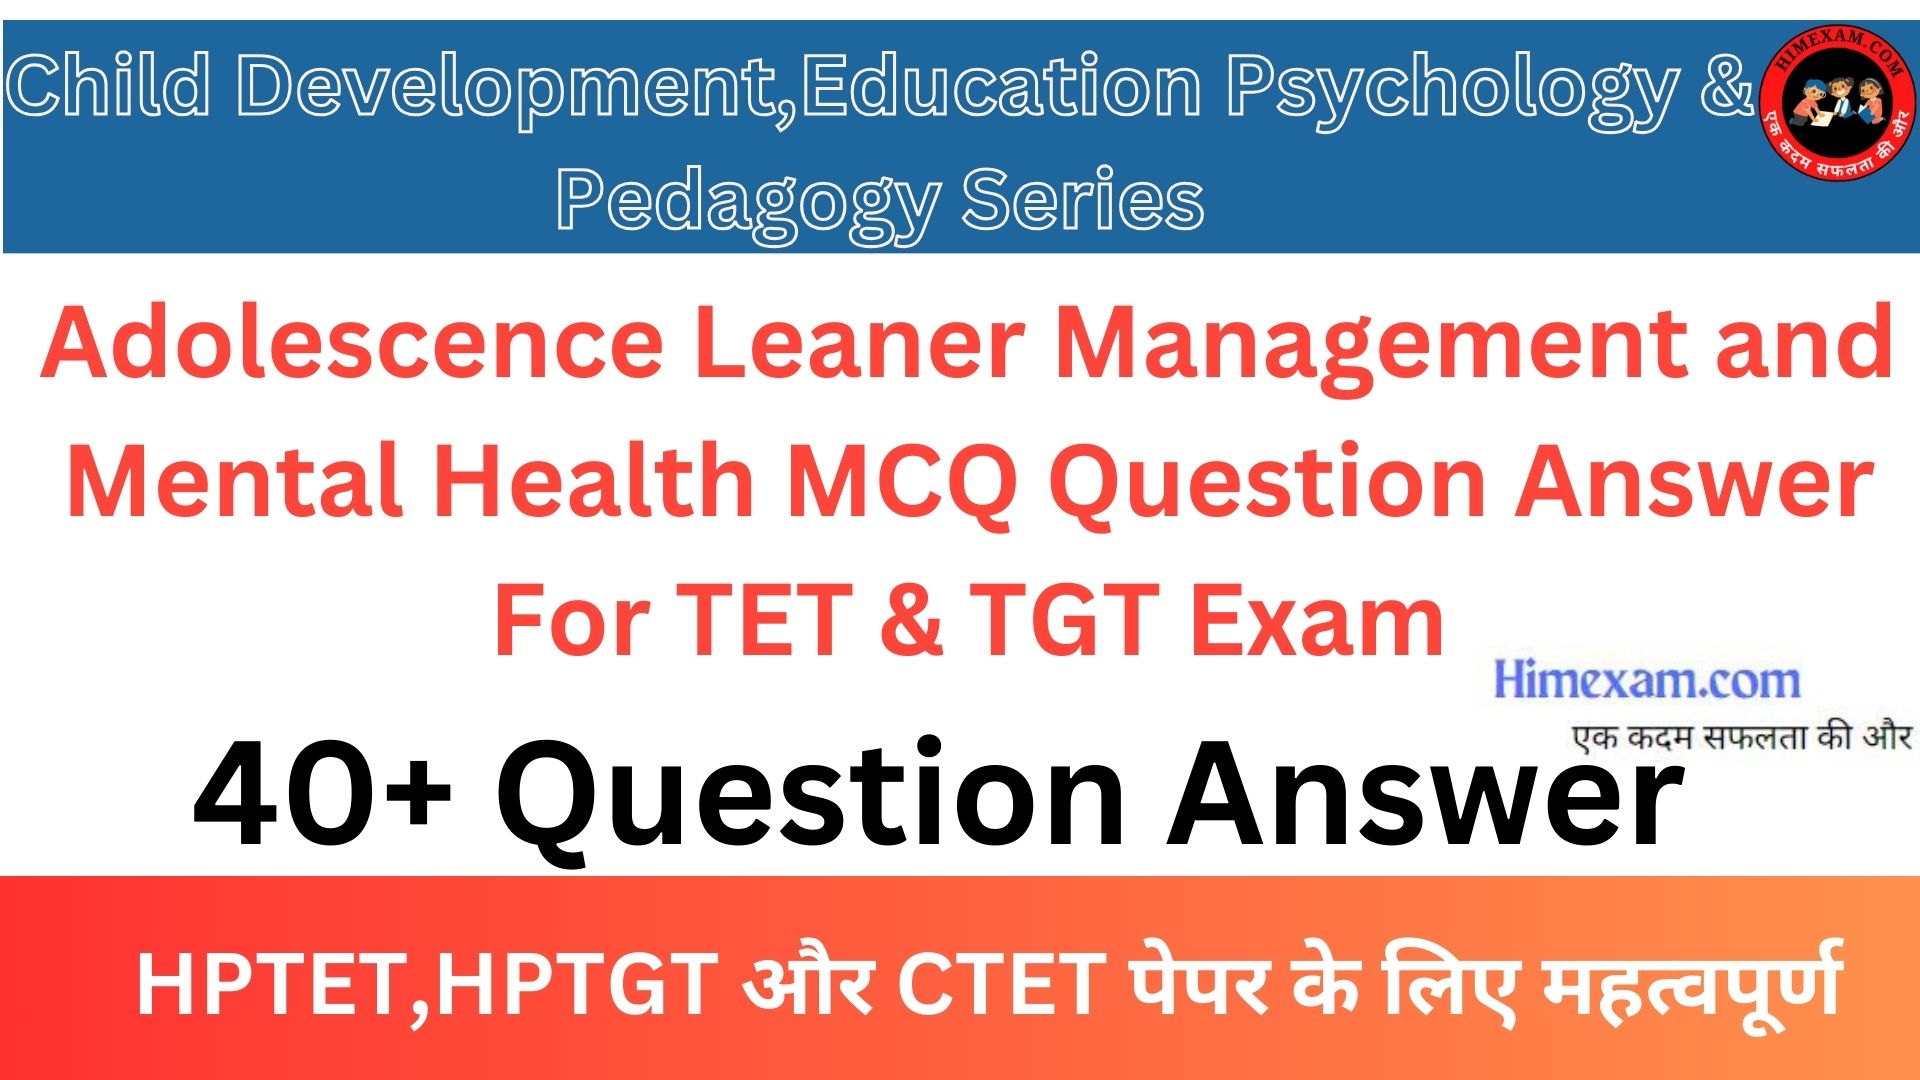 Adolescence Leaner Management and Mental Health MCQ Question Answer For TET & TGT Exam